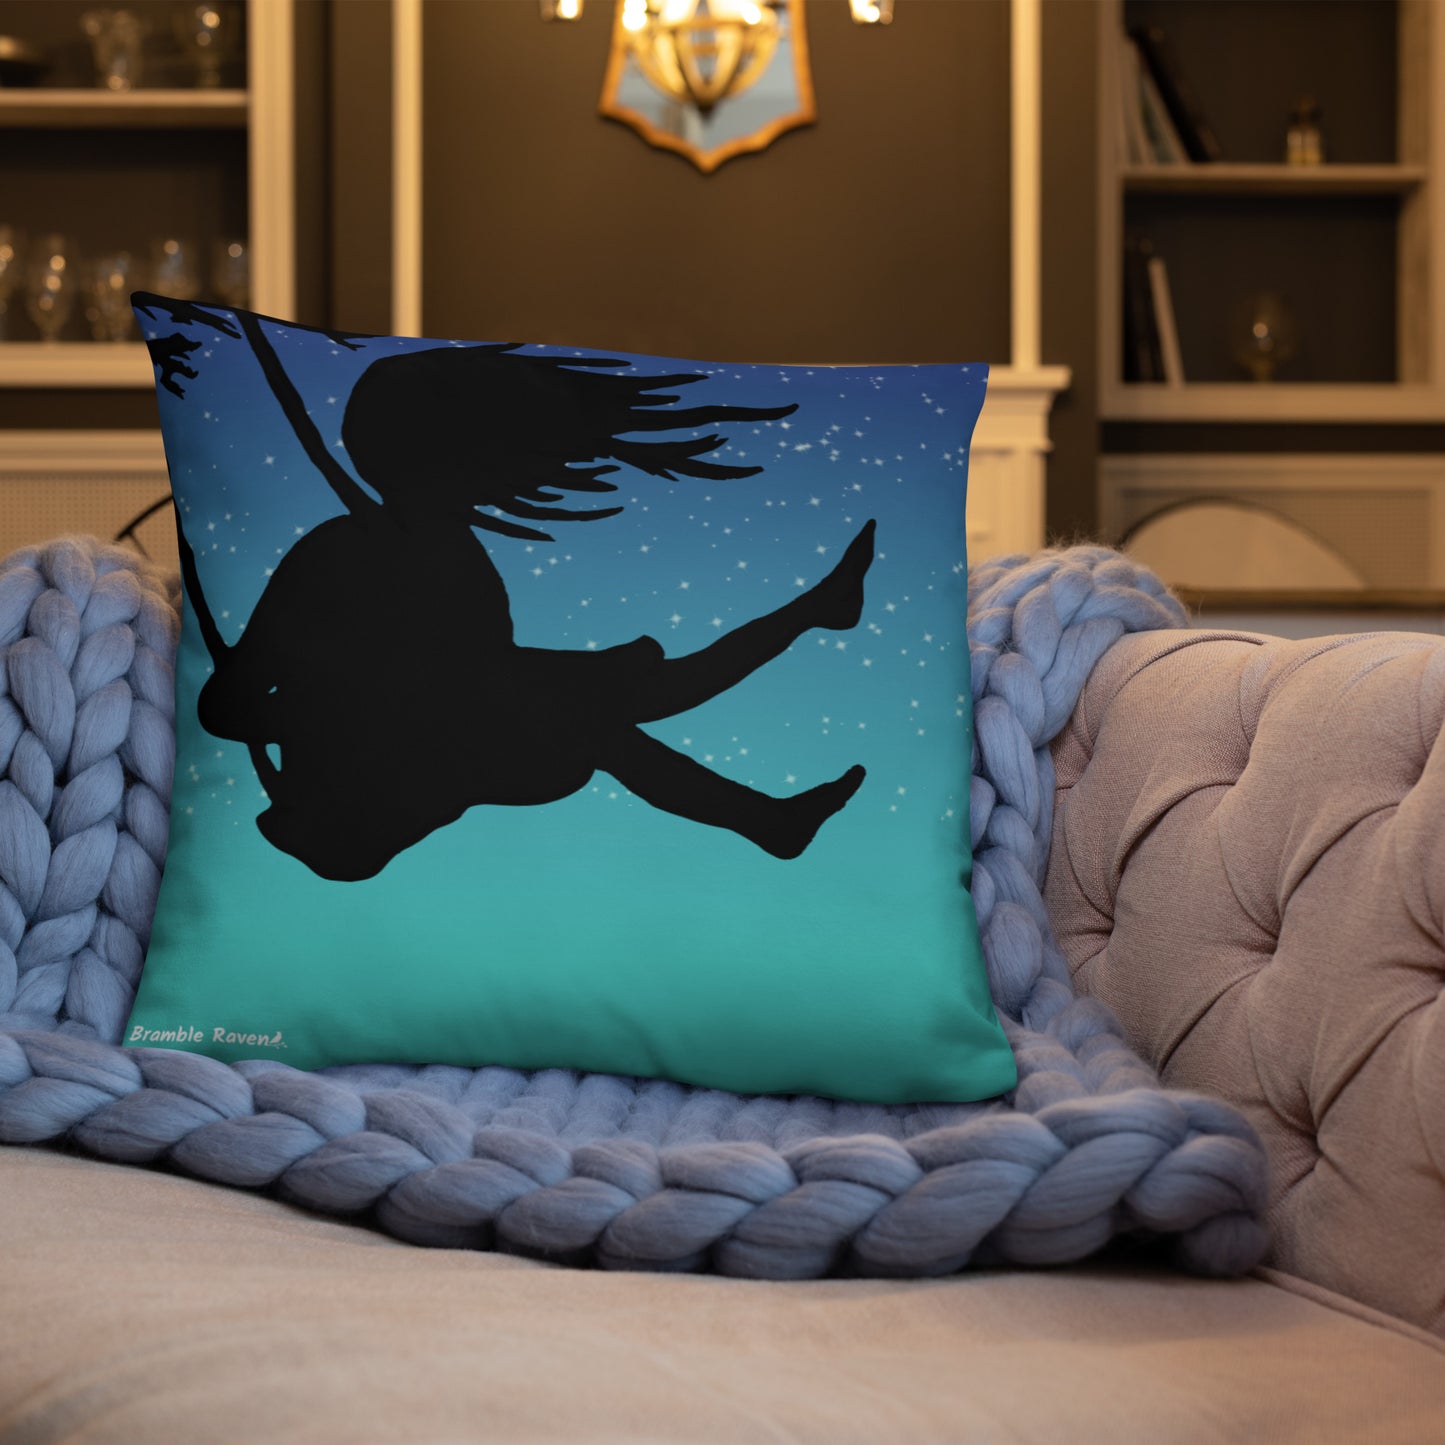 Original Swing Free design of a girl's silhouette in a tree swing against the backdrop of a blue starry sky. Rectangular image on front of pillow with blue background fabric. Pillow has design on both sides. 22 by 22 inch accent pillow. Back image shown on blue knitted blanket on tan sofa.